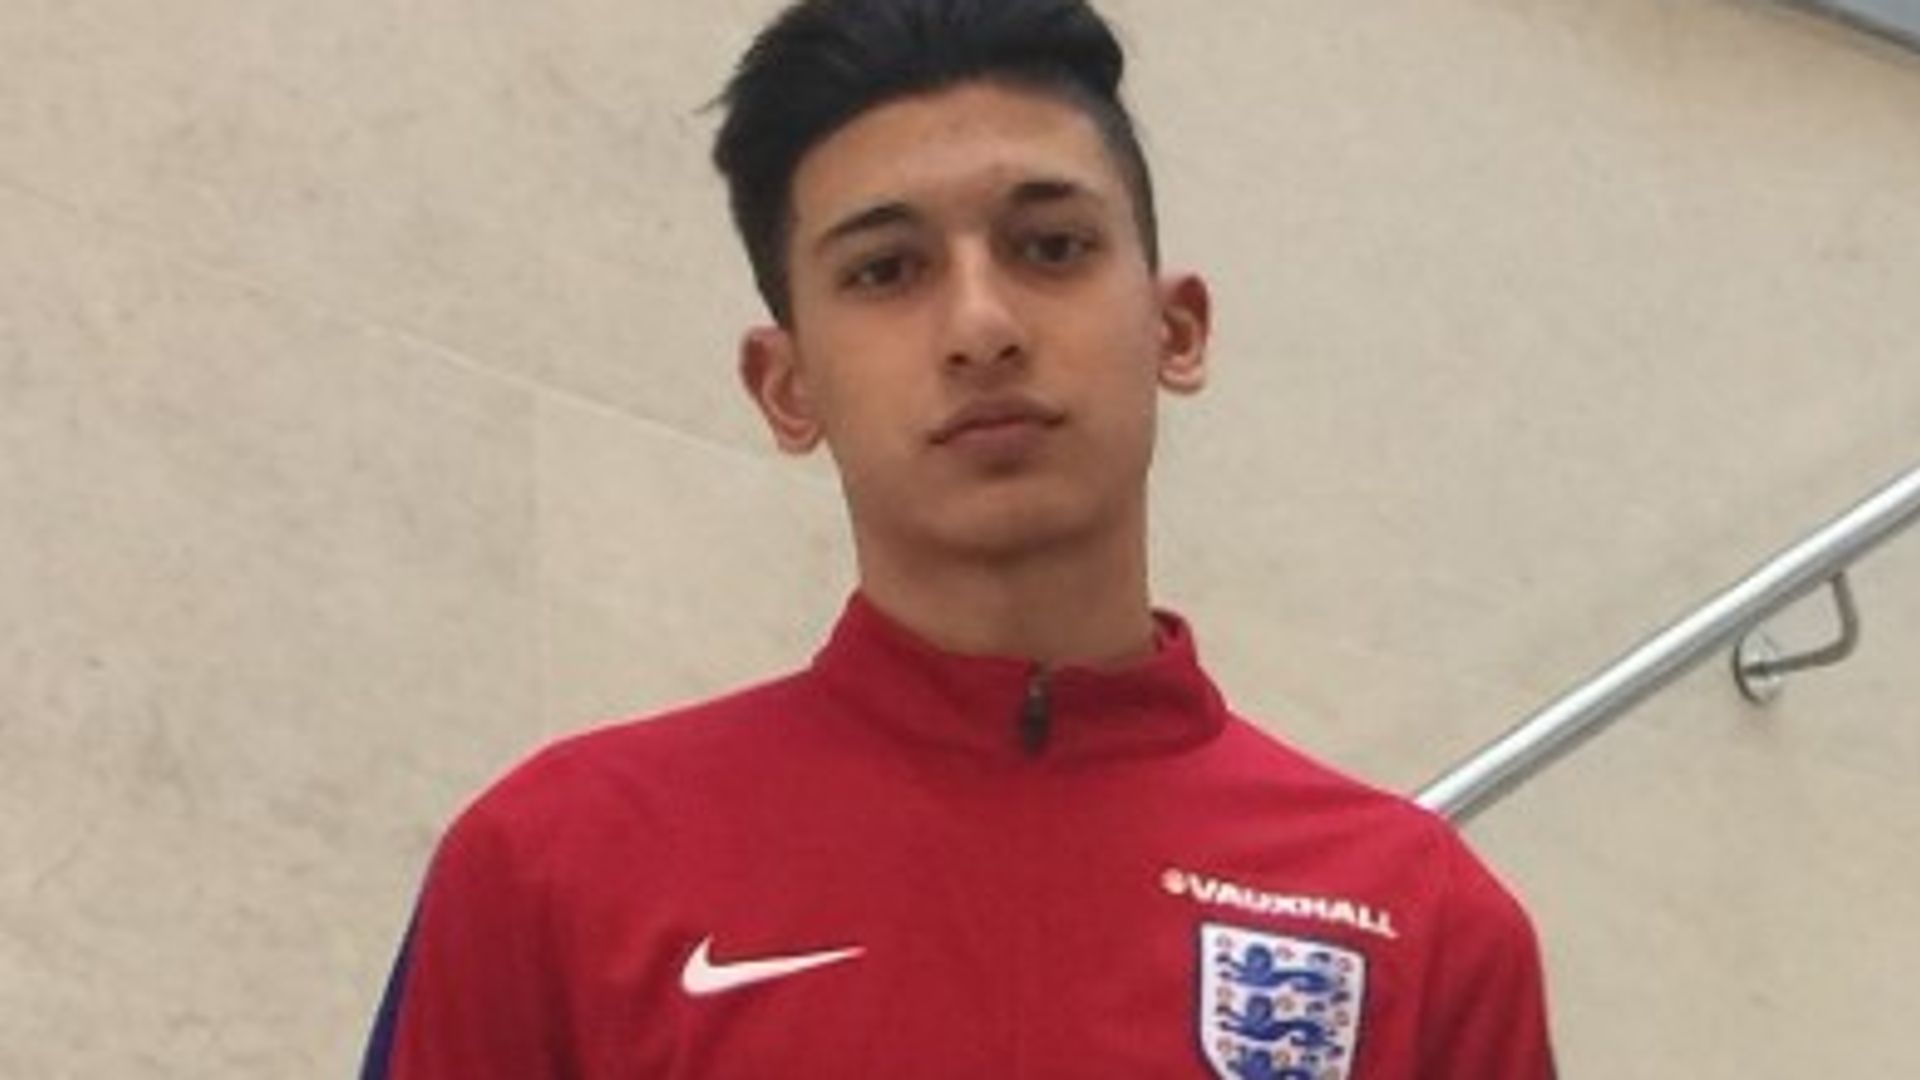 Cardiff set to sign England youth keeper Luthra